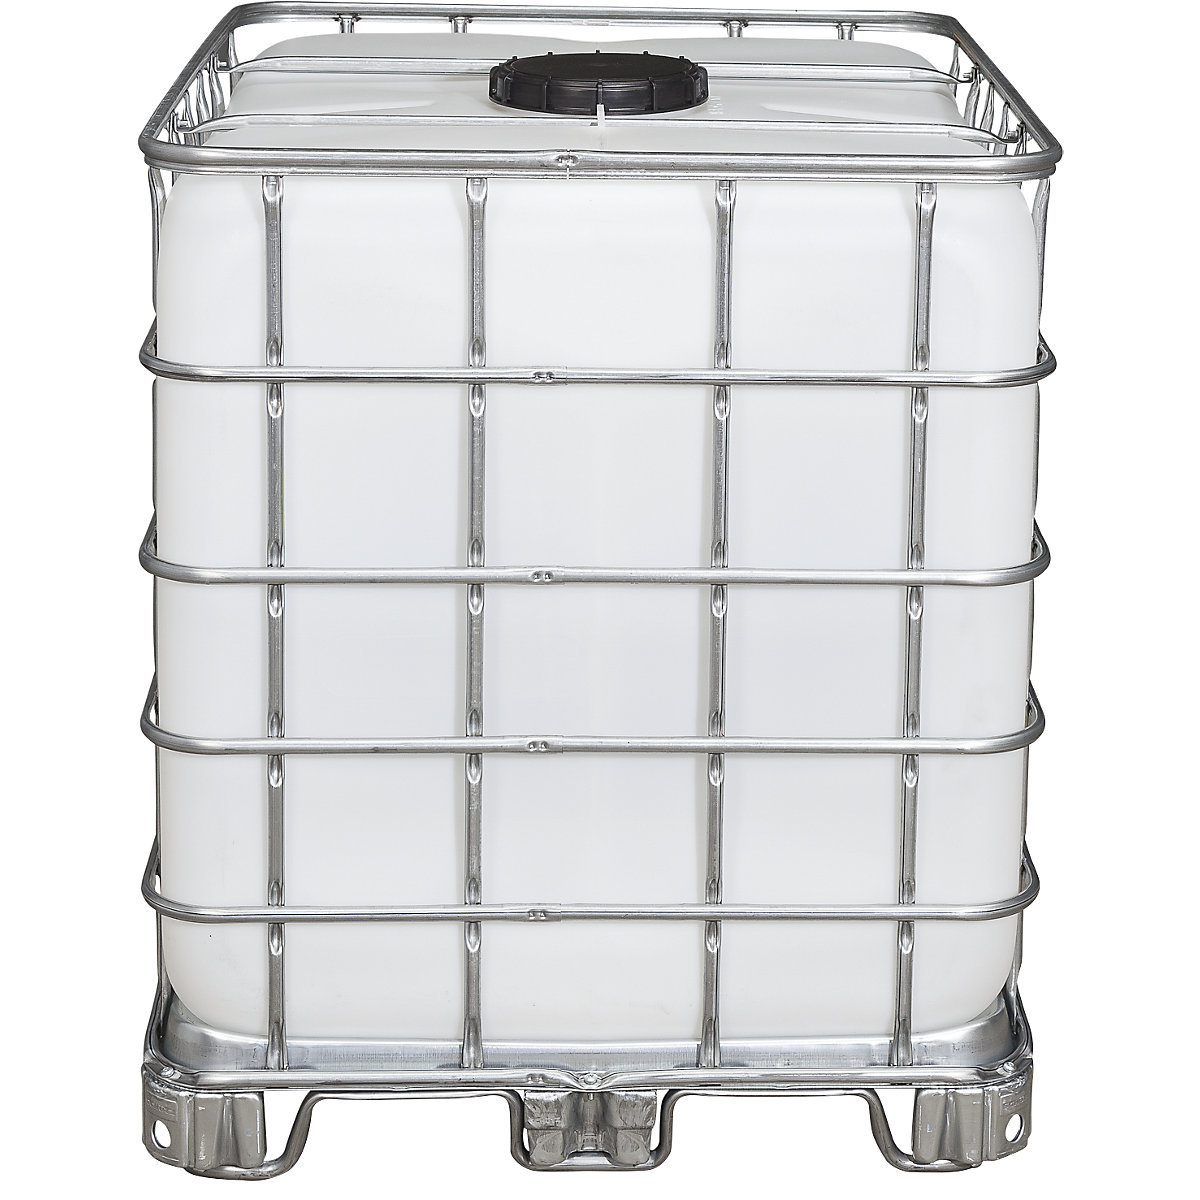 SCHÜTZ 1000 L IBC CONTAINER, REASONED / ENDED, ANTISTATIC EX WITH UN,  RINED, METAL PALLET, 150/50